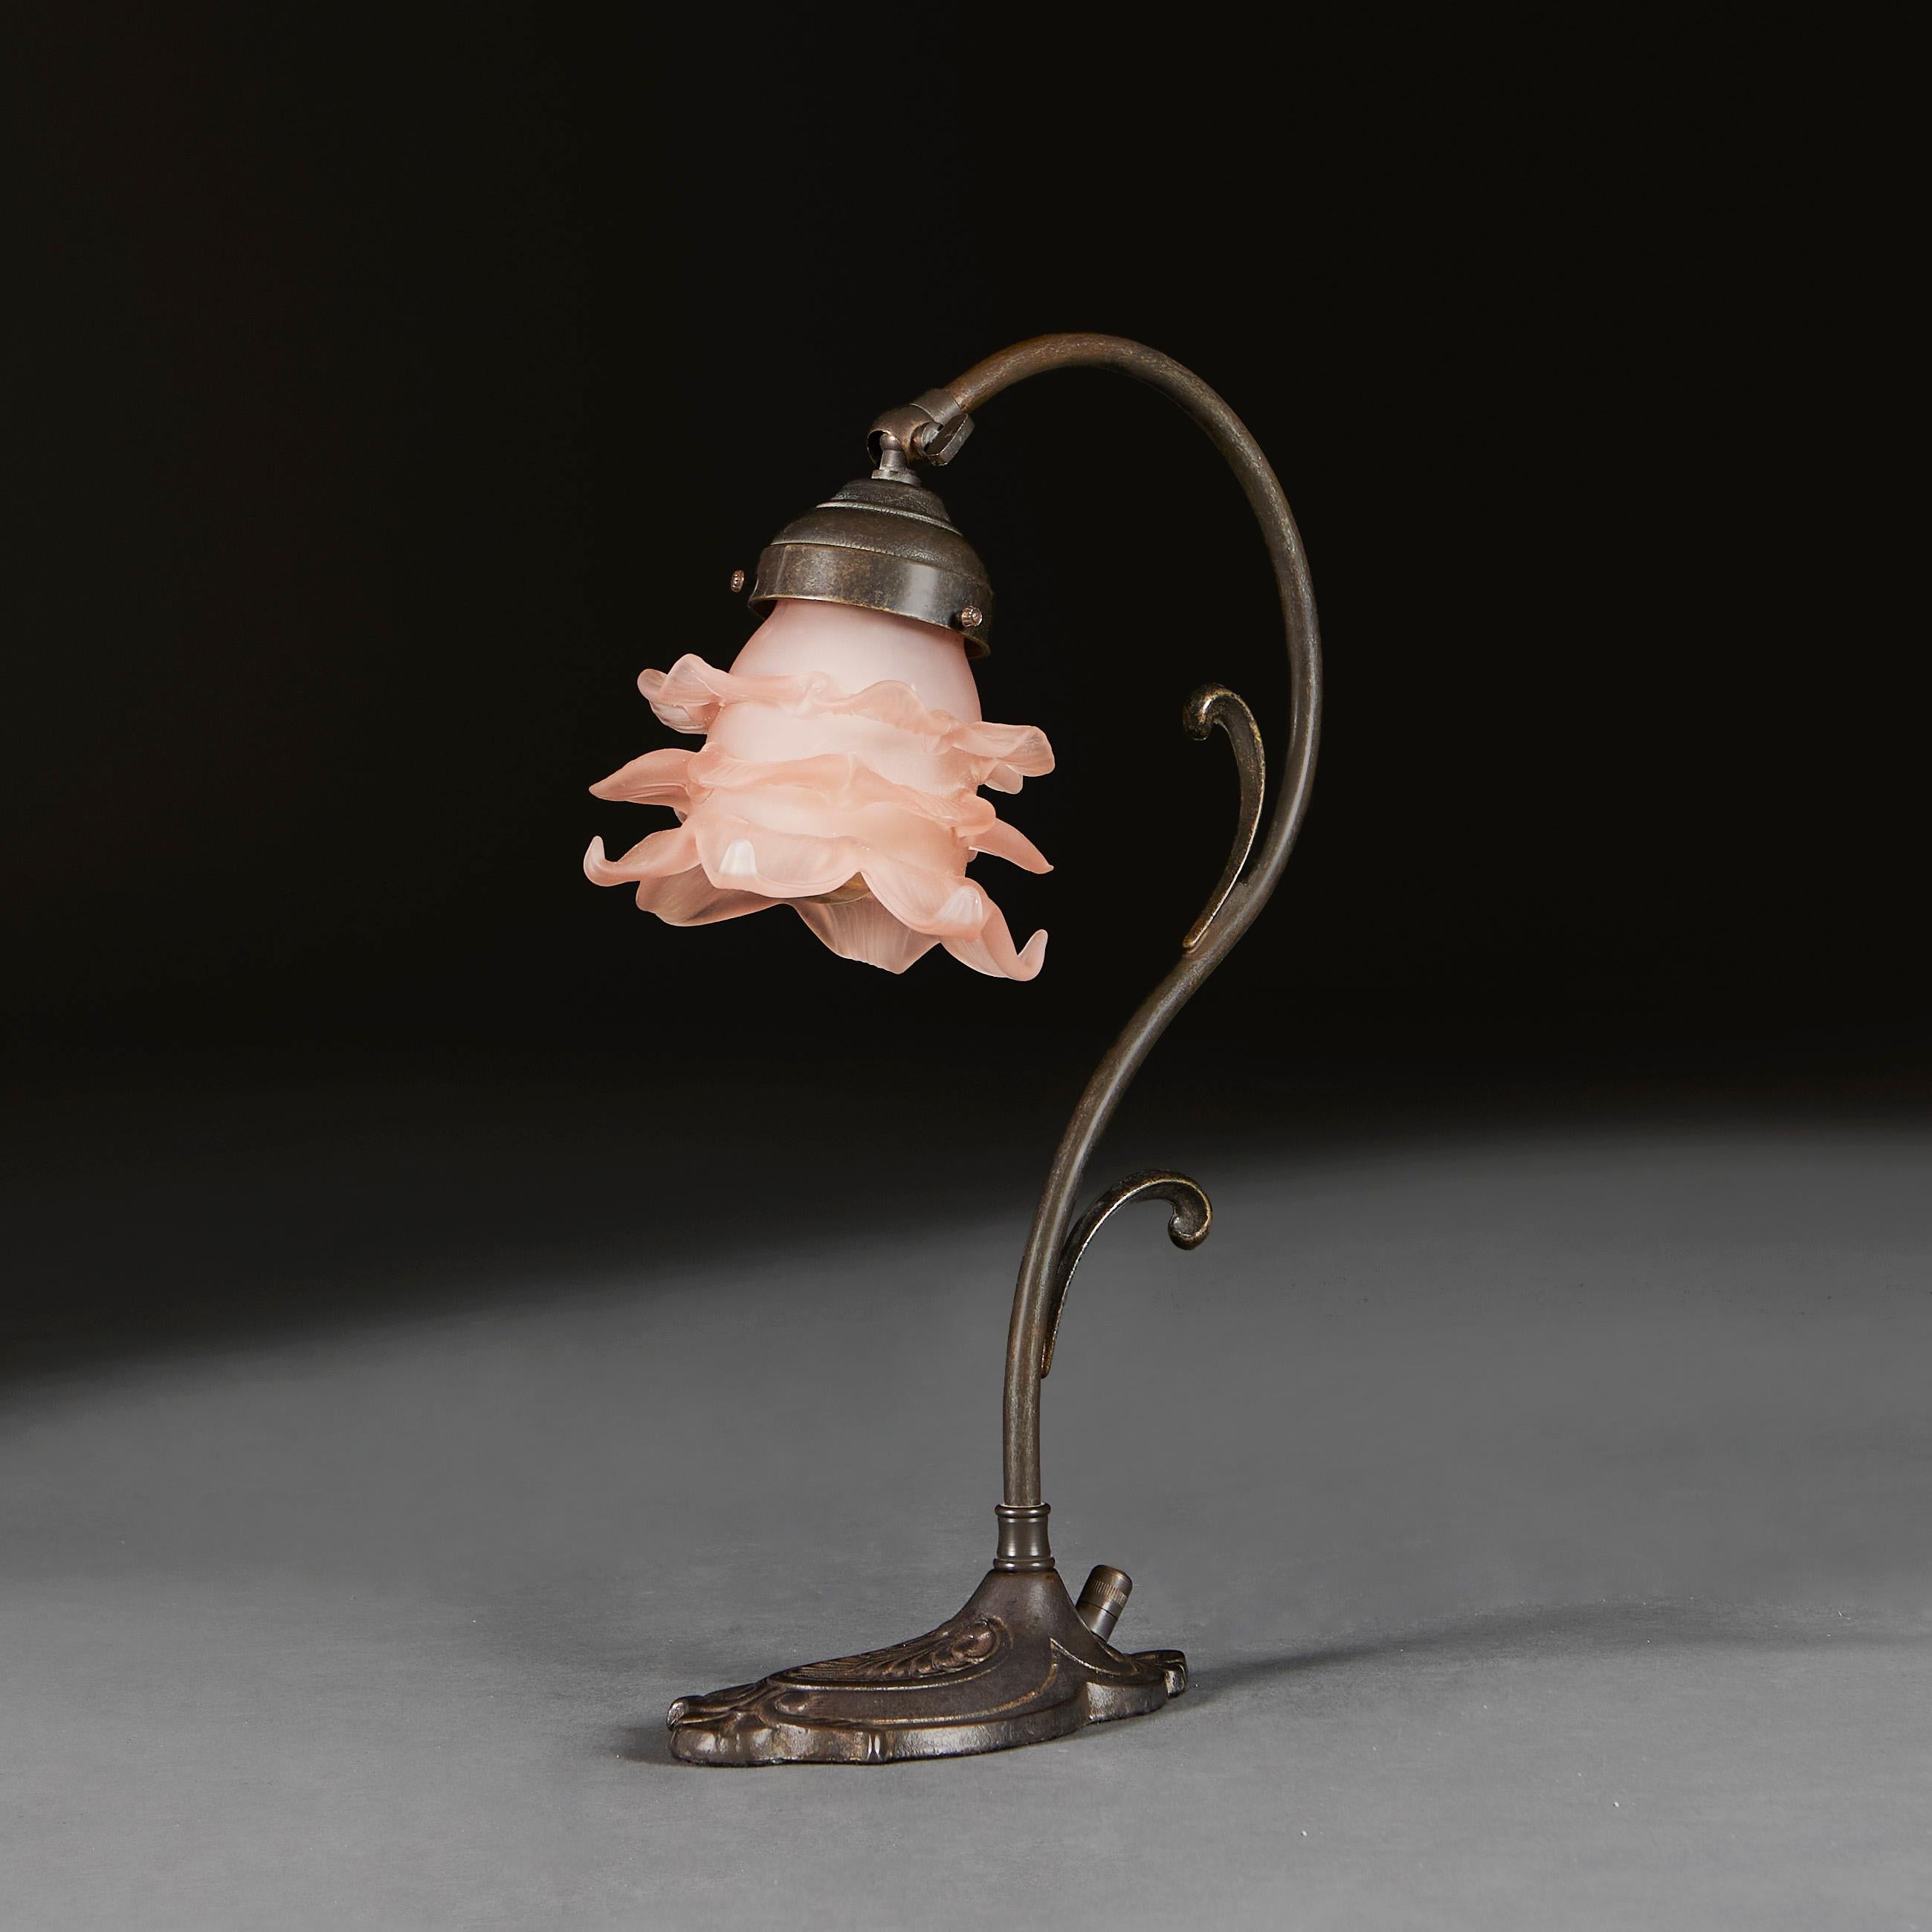 France, circa 1910

An unusual Art Nouveau bronzed desk lamp, with artichoke shade, all supported on an oval base with foliate designs.

Measures: Height 36.00cm
Depth of base 17.00cm.

Please note: This is currently wire for the UK with BC bulb